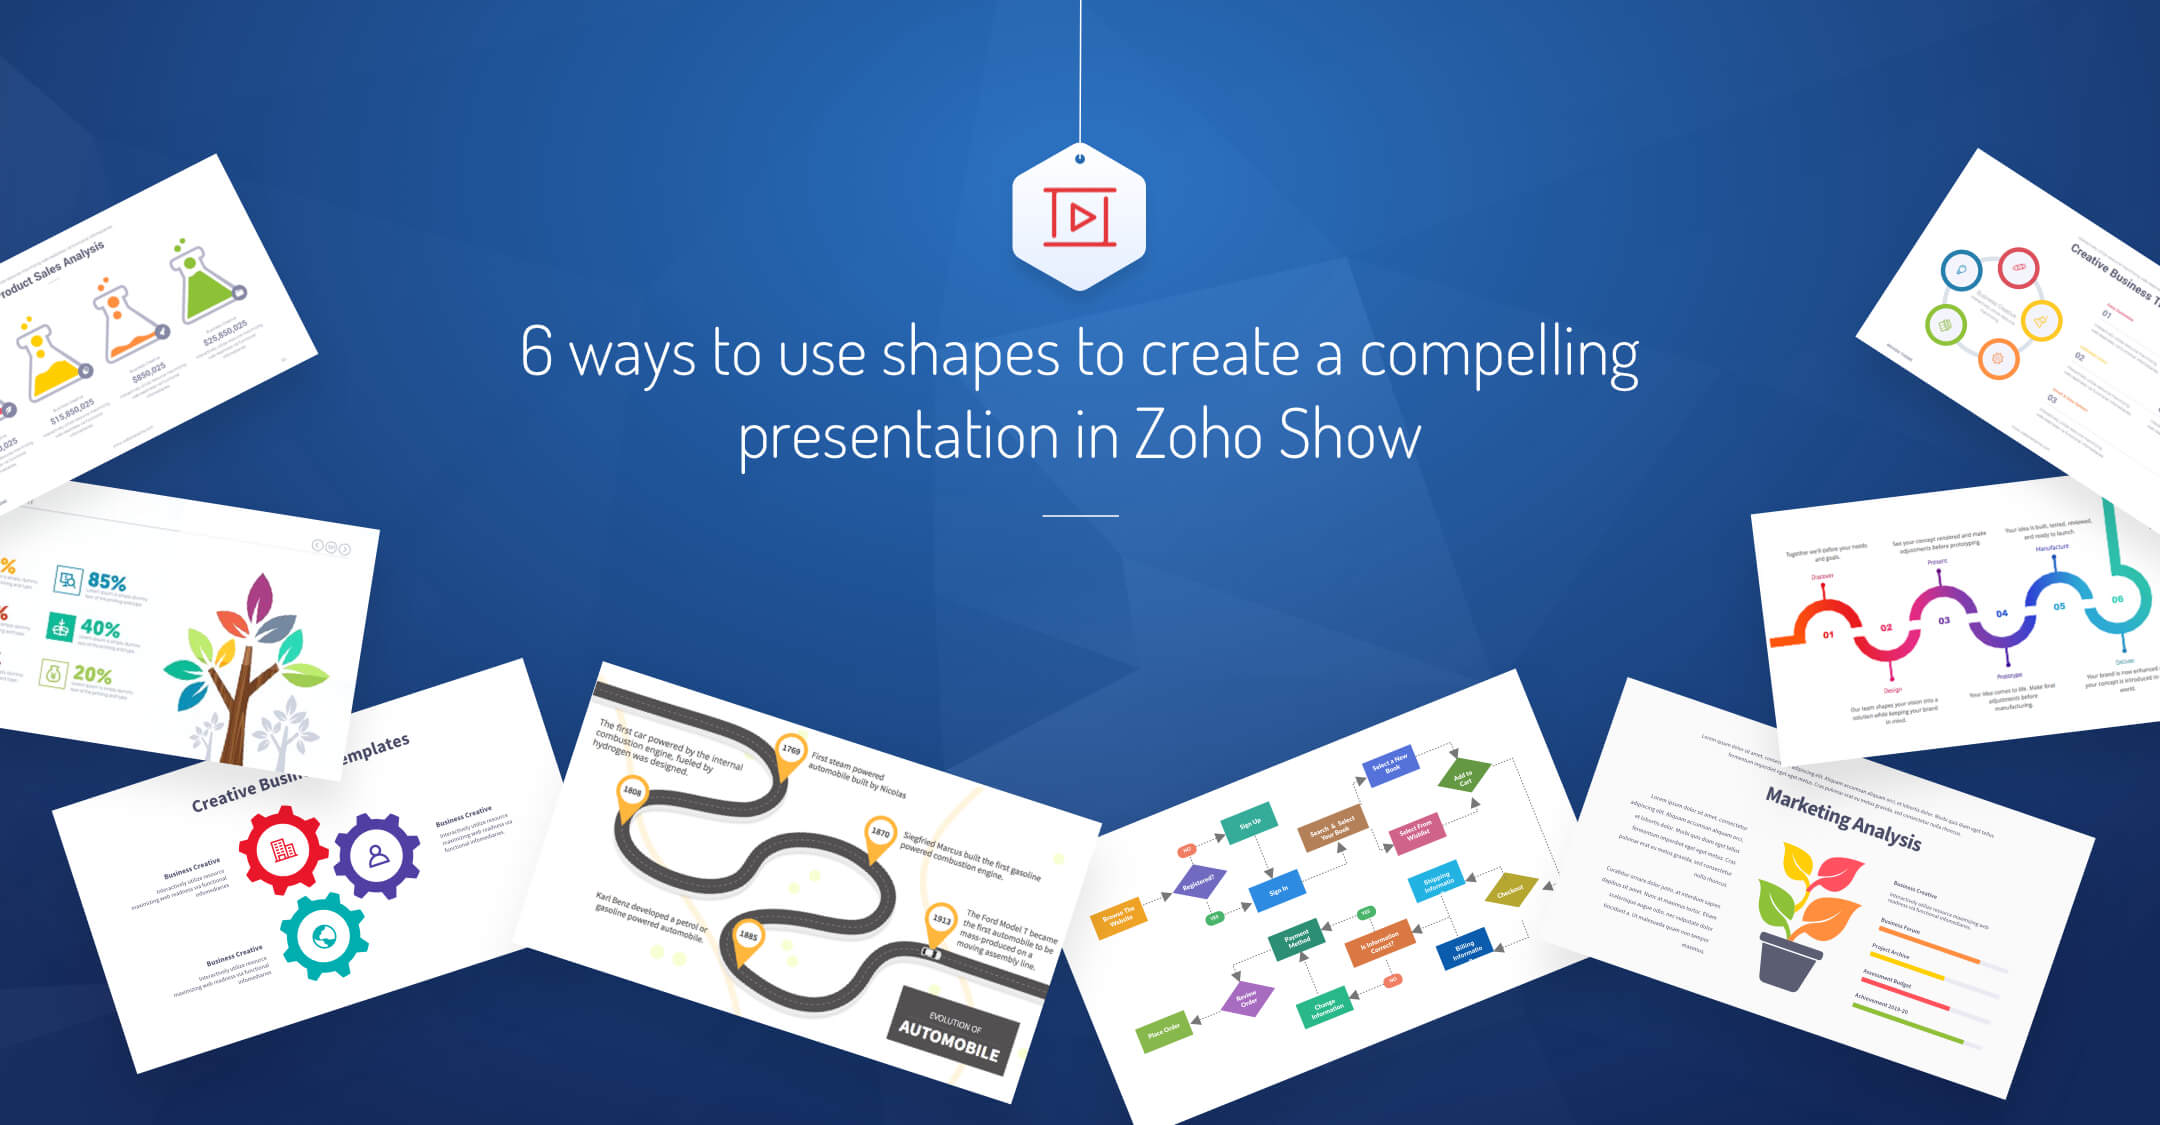 Six ways to use shapes to create a compelling presentation in Zoho Show